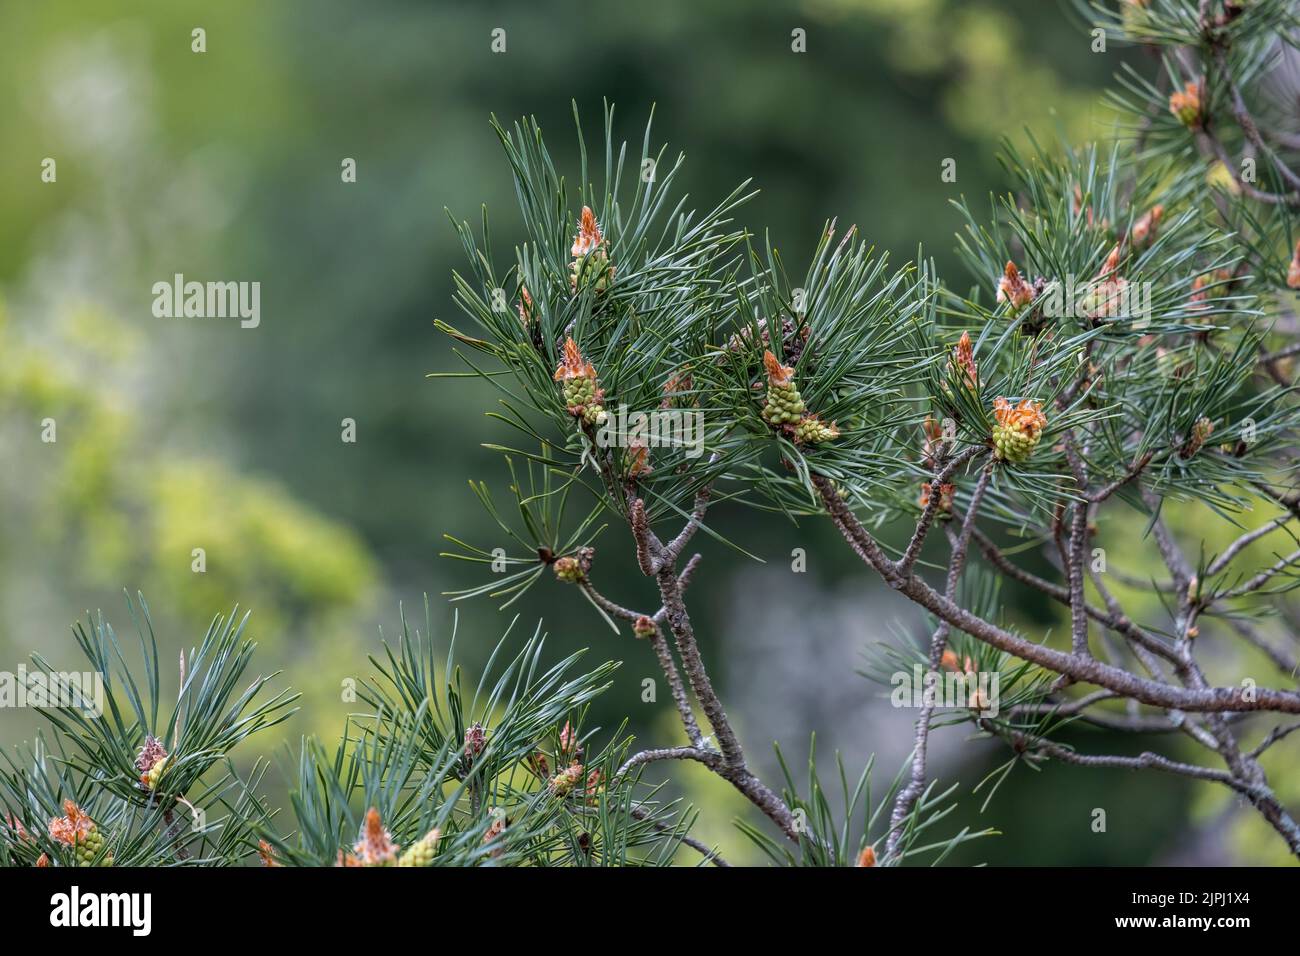 Scots pine (Pinus sylvestris) green leaves and young seed cones Stock Photo